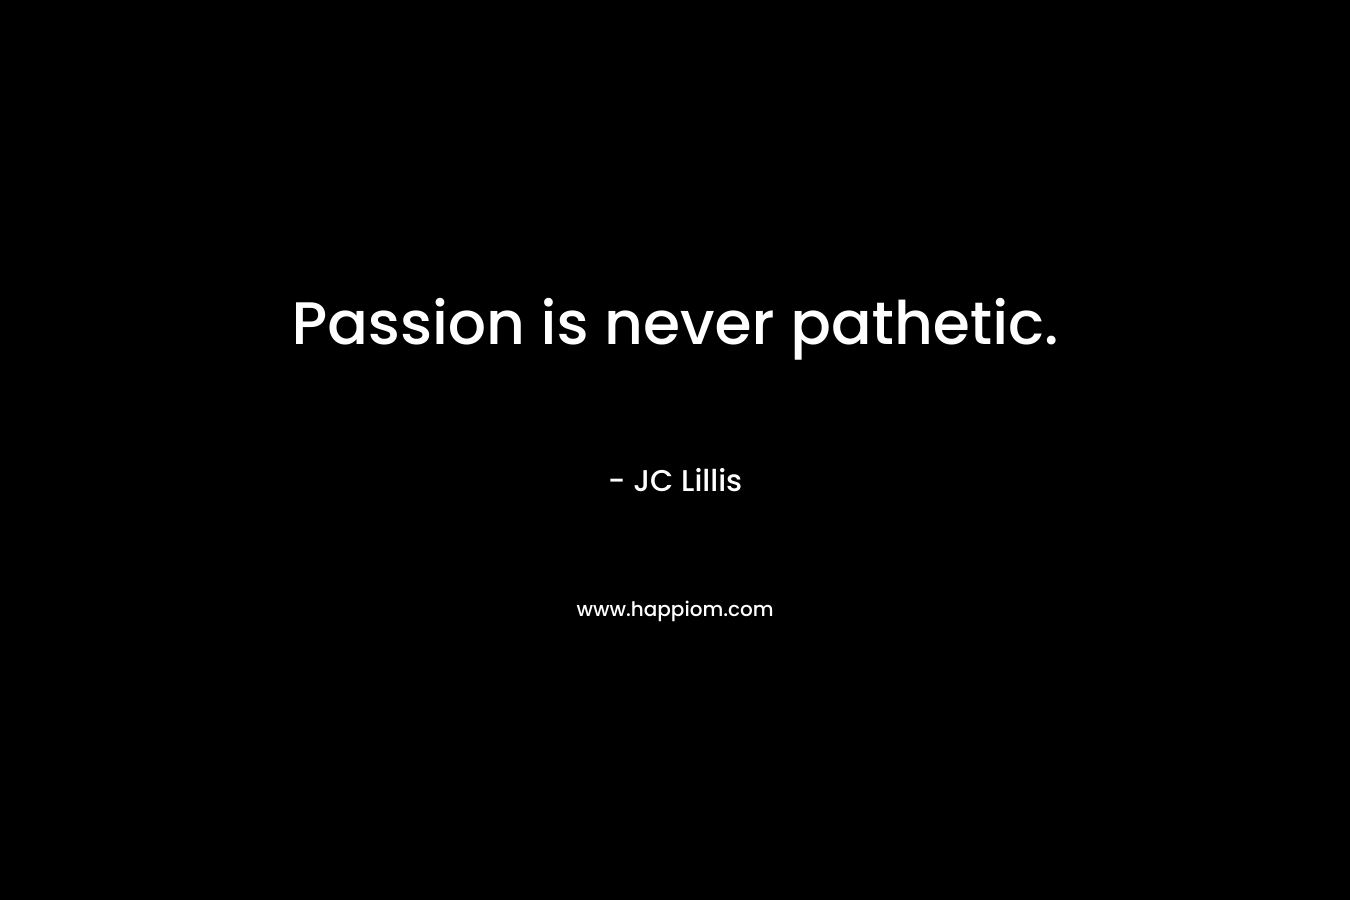 Passion is never pathetic.